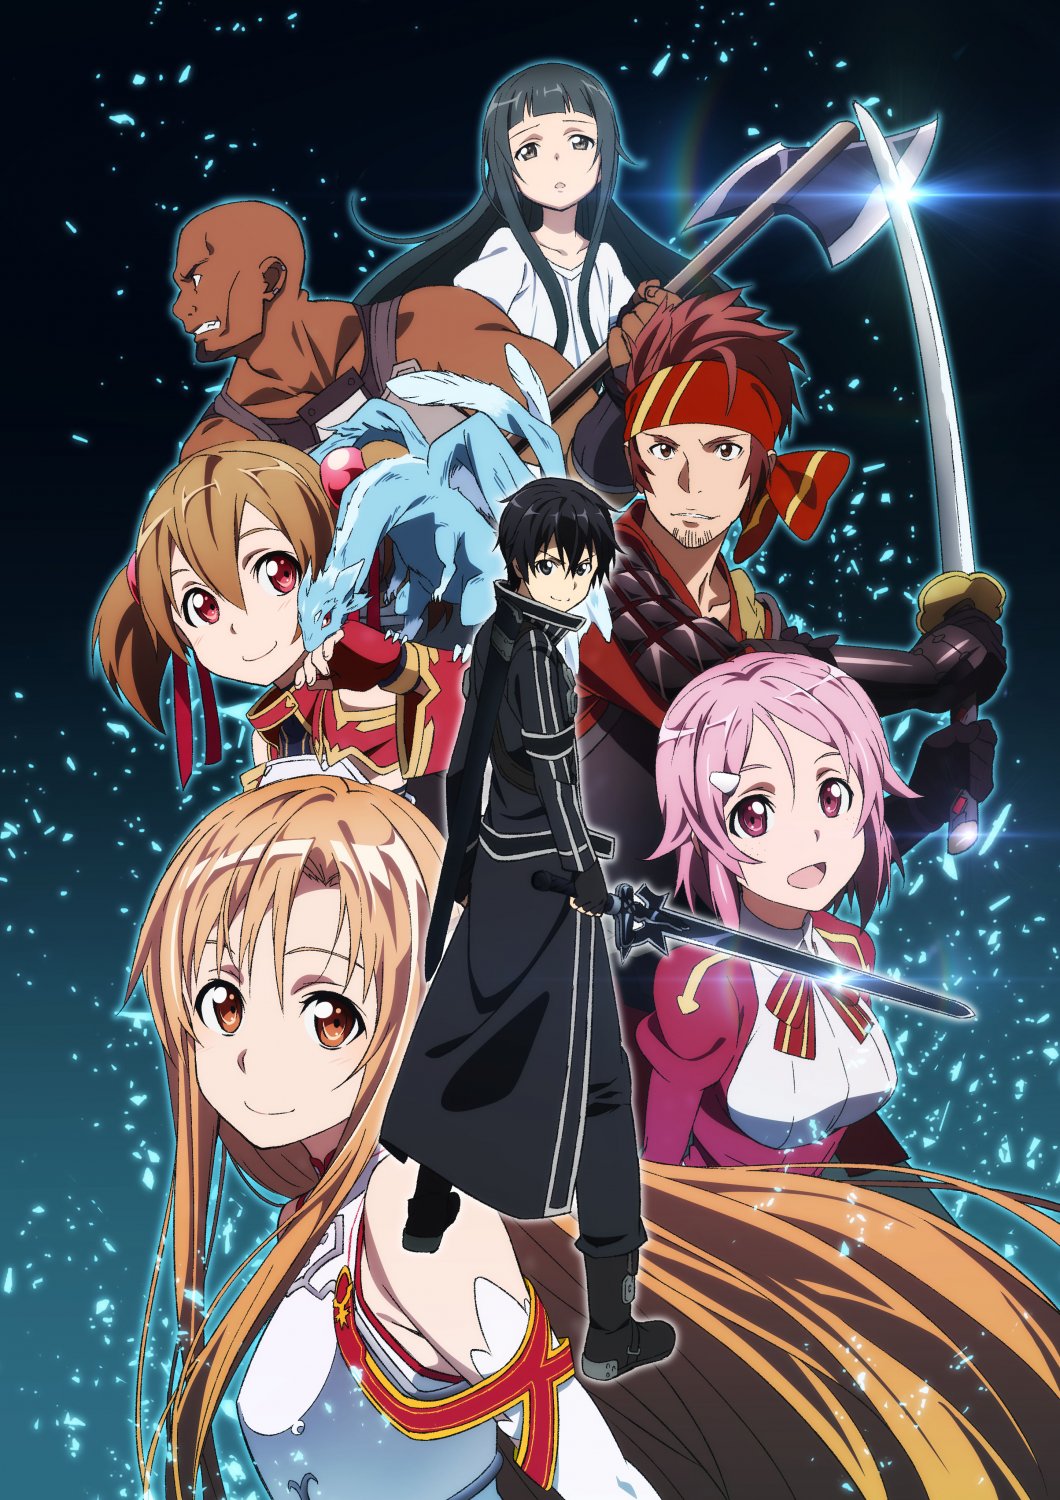 Sword Art Online Style B Poster 13x19 inches